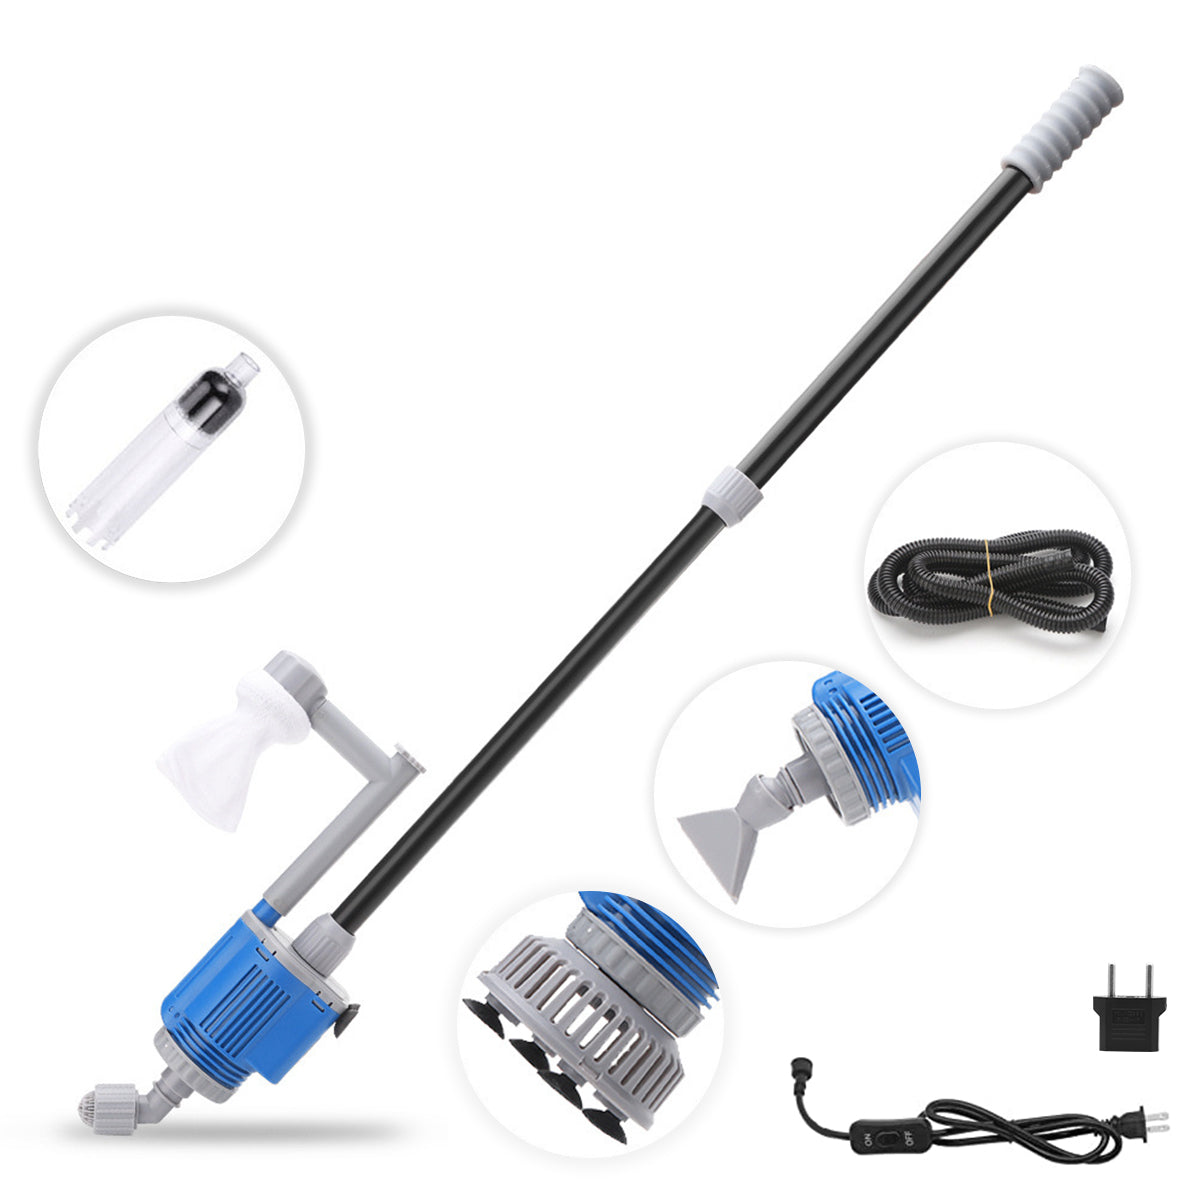 Qpets® Electric Fish Tank Cleaner, Automatic Siphon Vacuum Cleaner Kit,  Aquarium Gravel Cleaner 20W Aquarium Vacuum for Aquarium Cleaning, Changing